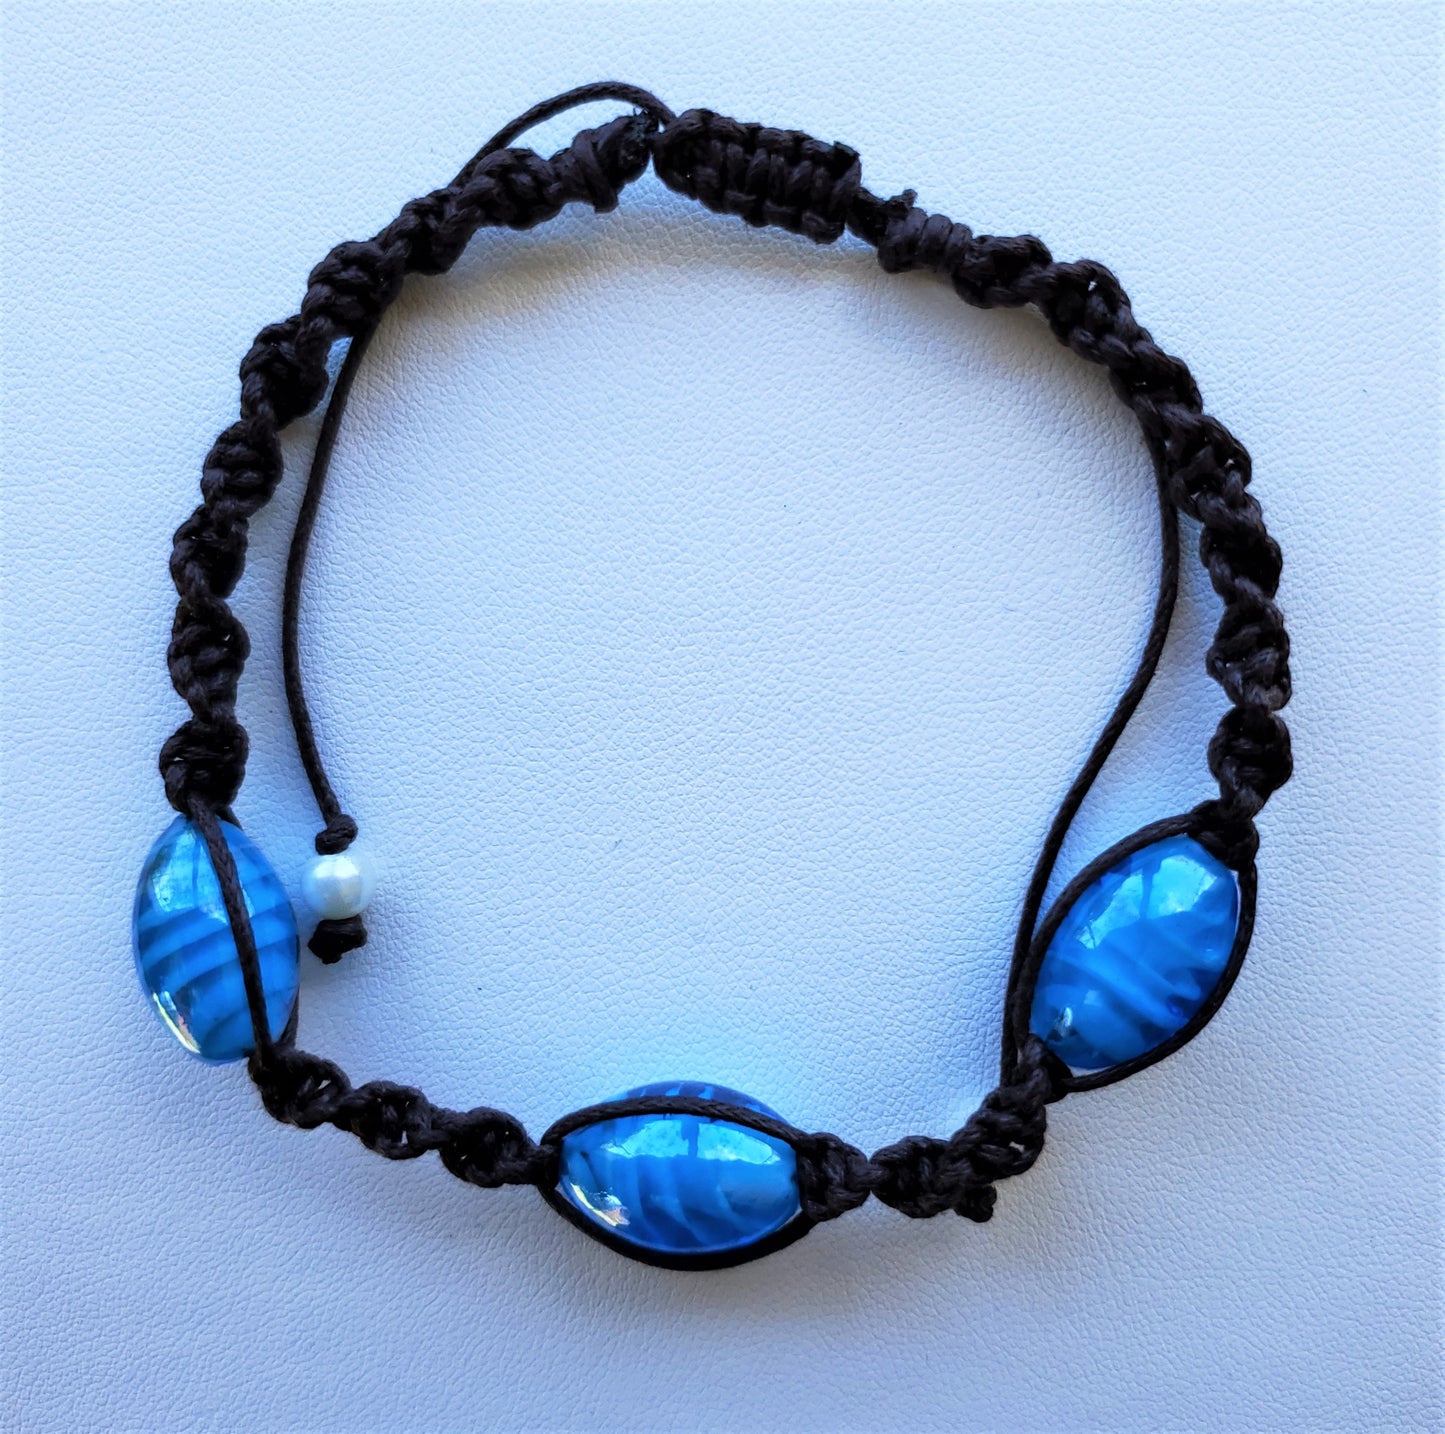 Hand Braided Macramé & Recycled Glass Bead Bracelet  - Turquoise Oval